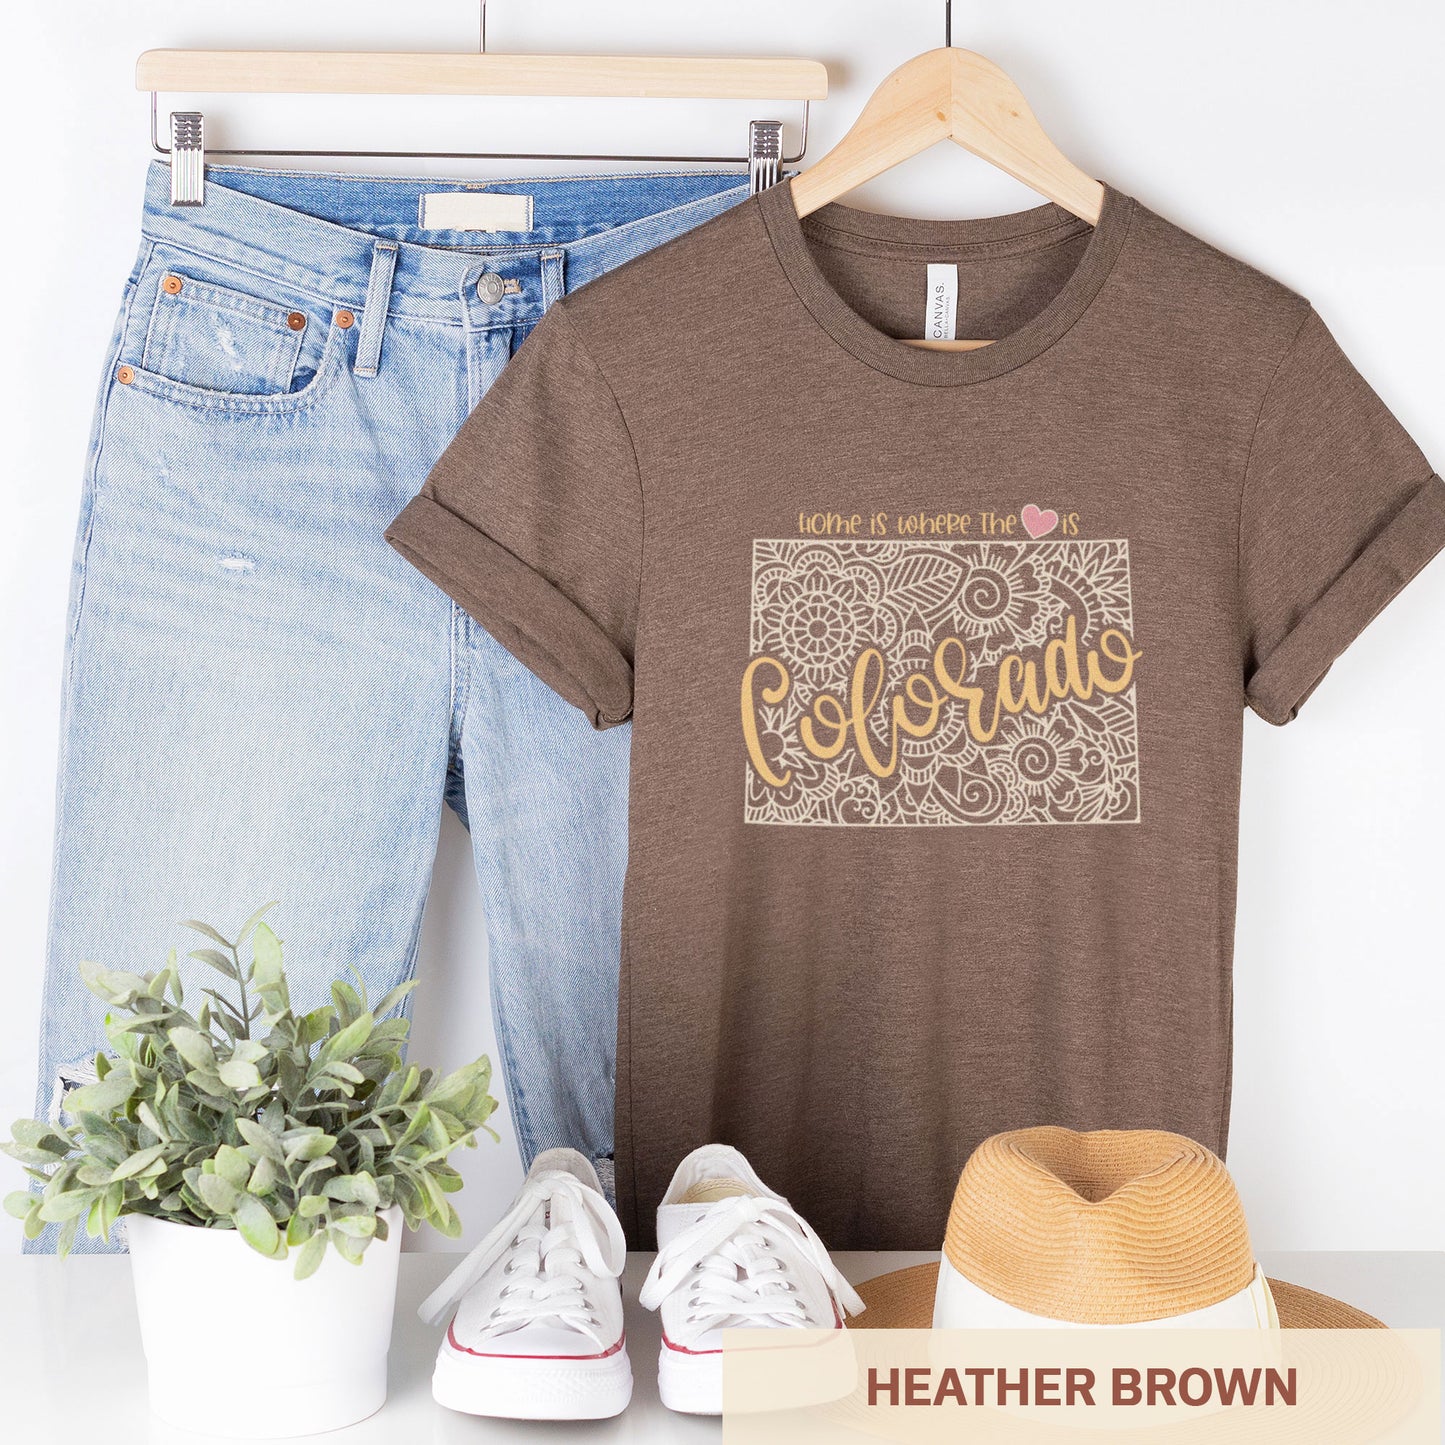  A hanging heather brown Bella Canvas t-shirt featuring a mandala in the shape of Colorado with the words home is where the heart is.